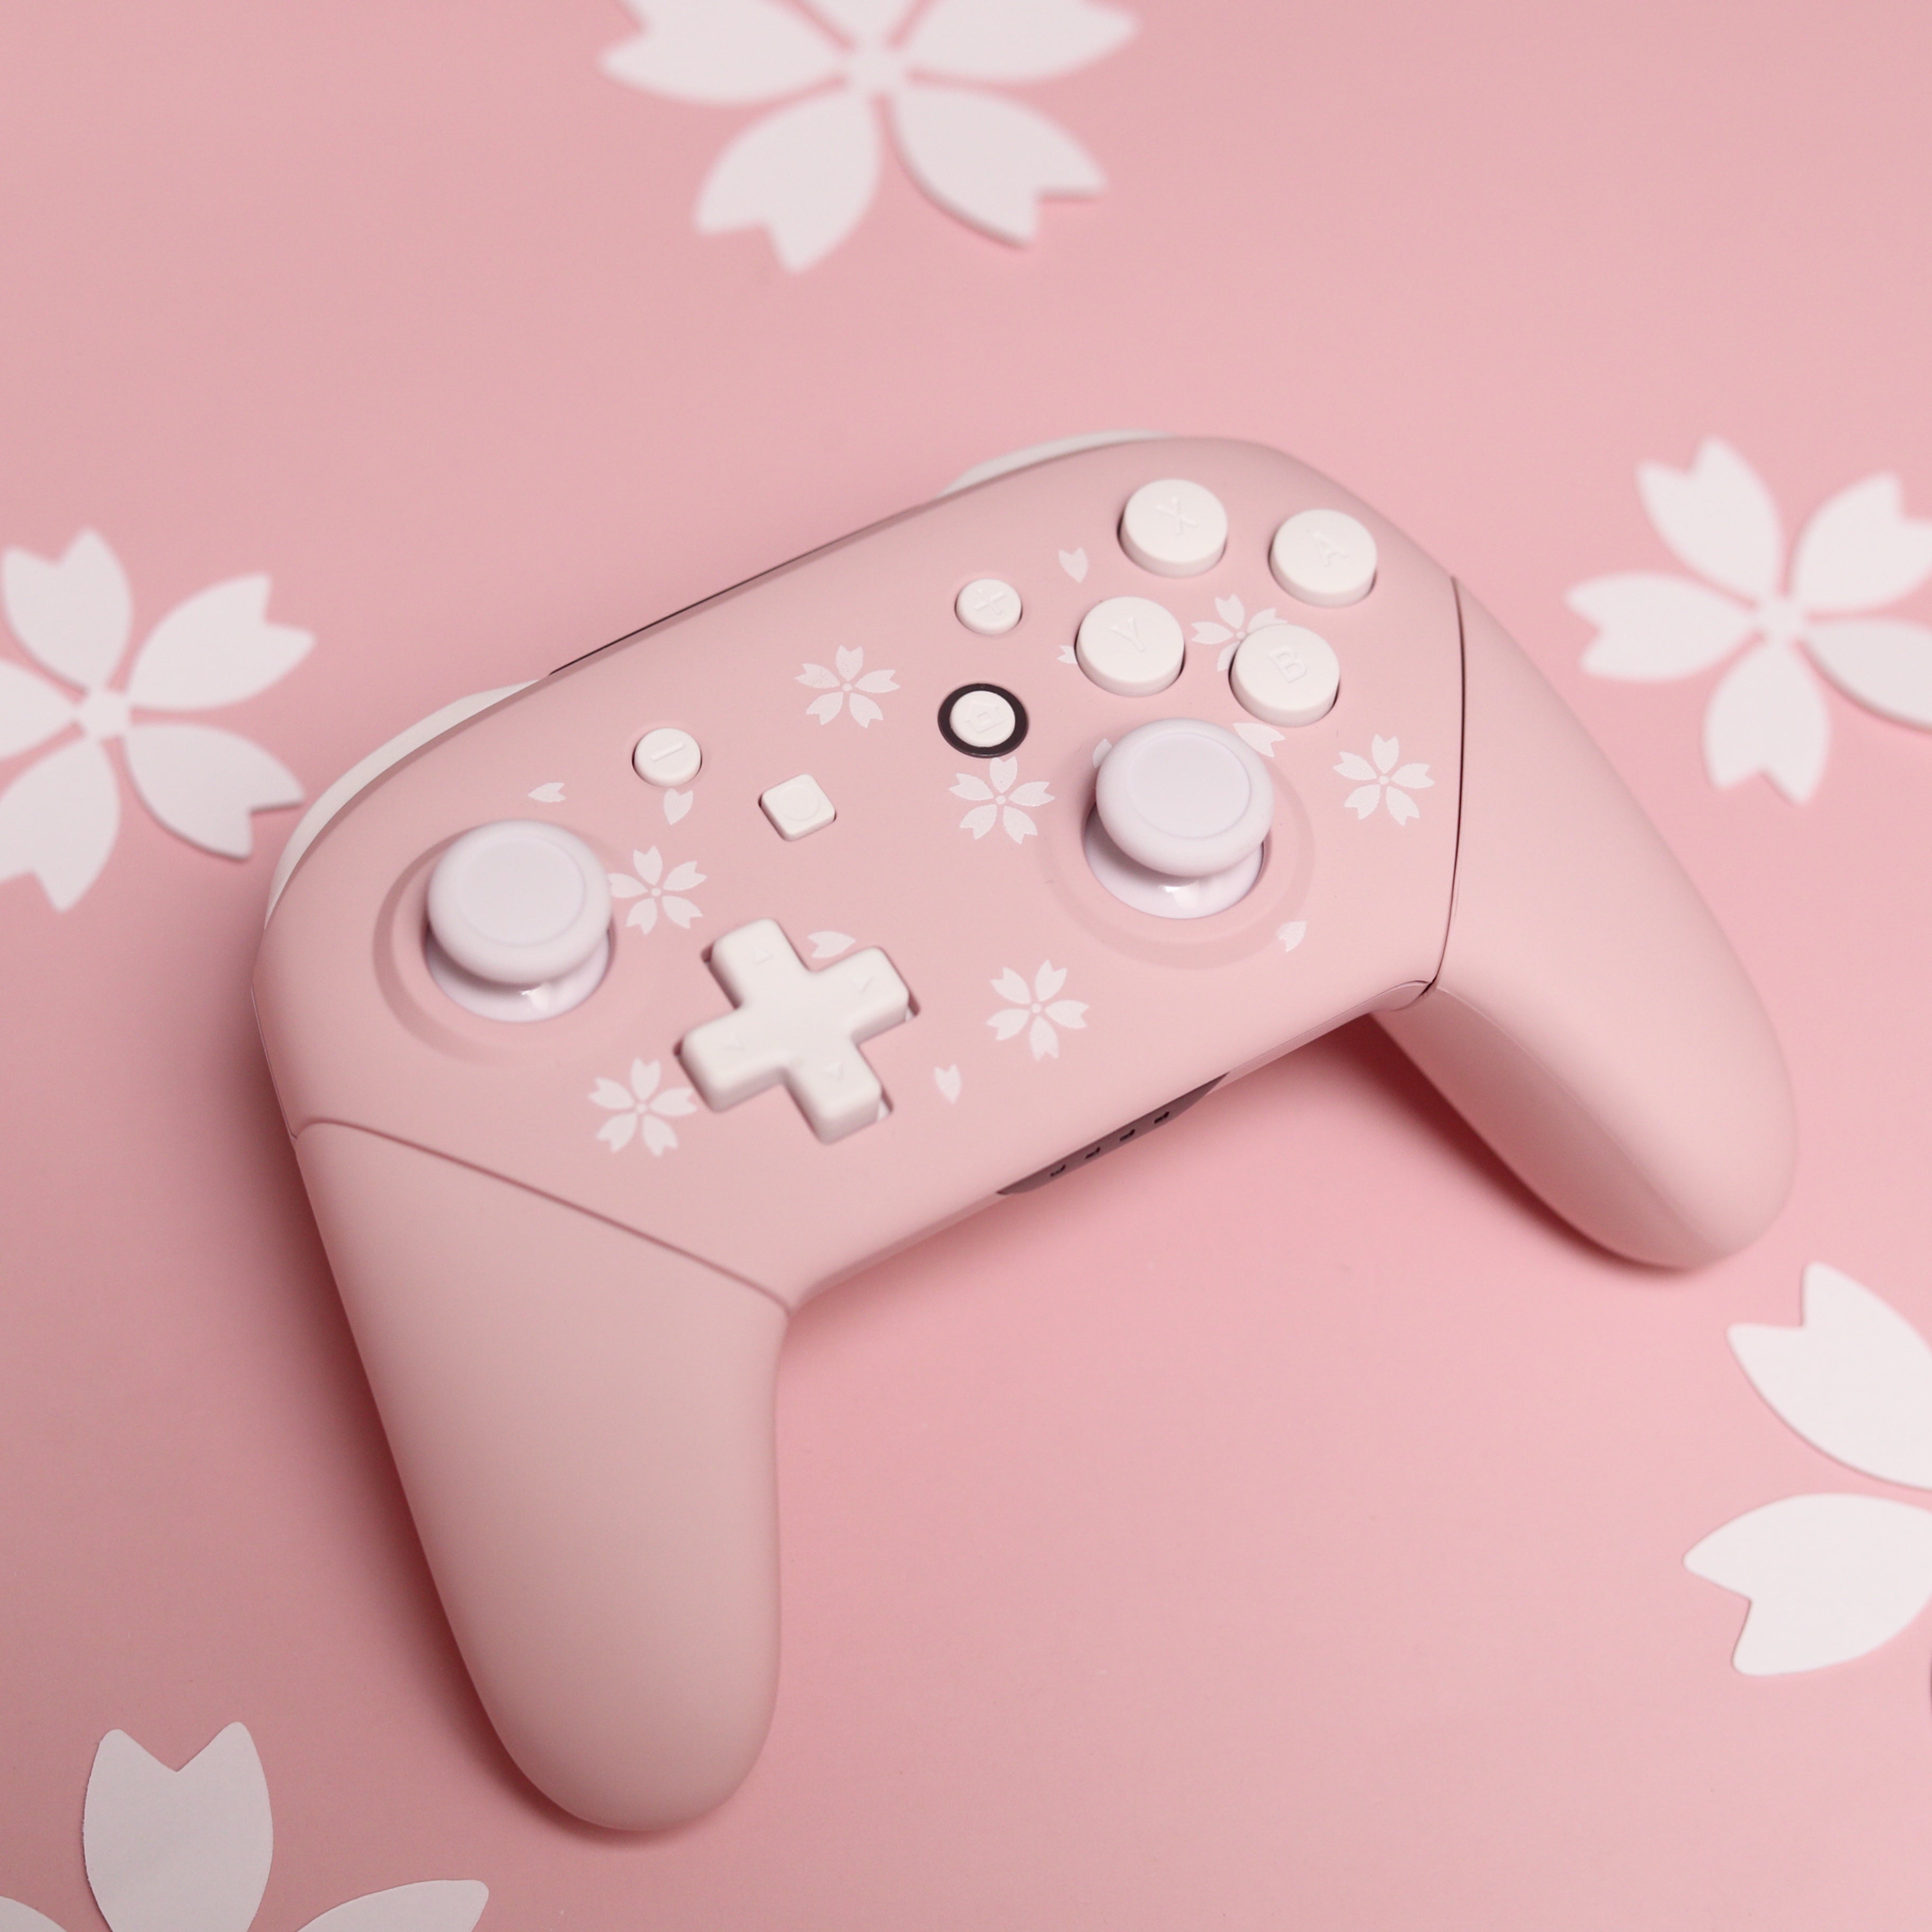 Custom Nintendo Switch Pro Controller in Sakura Pink With White Buttons 